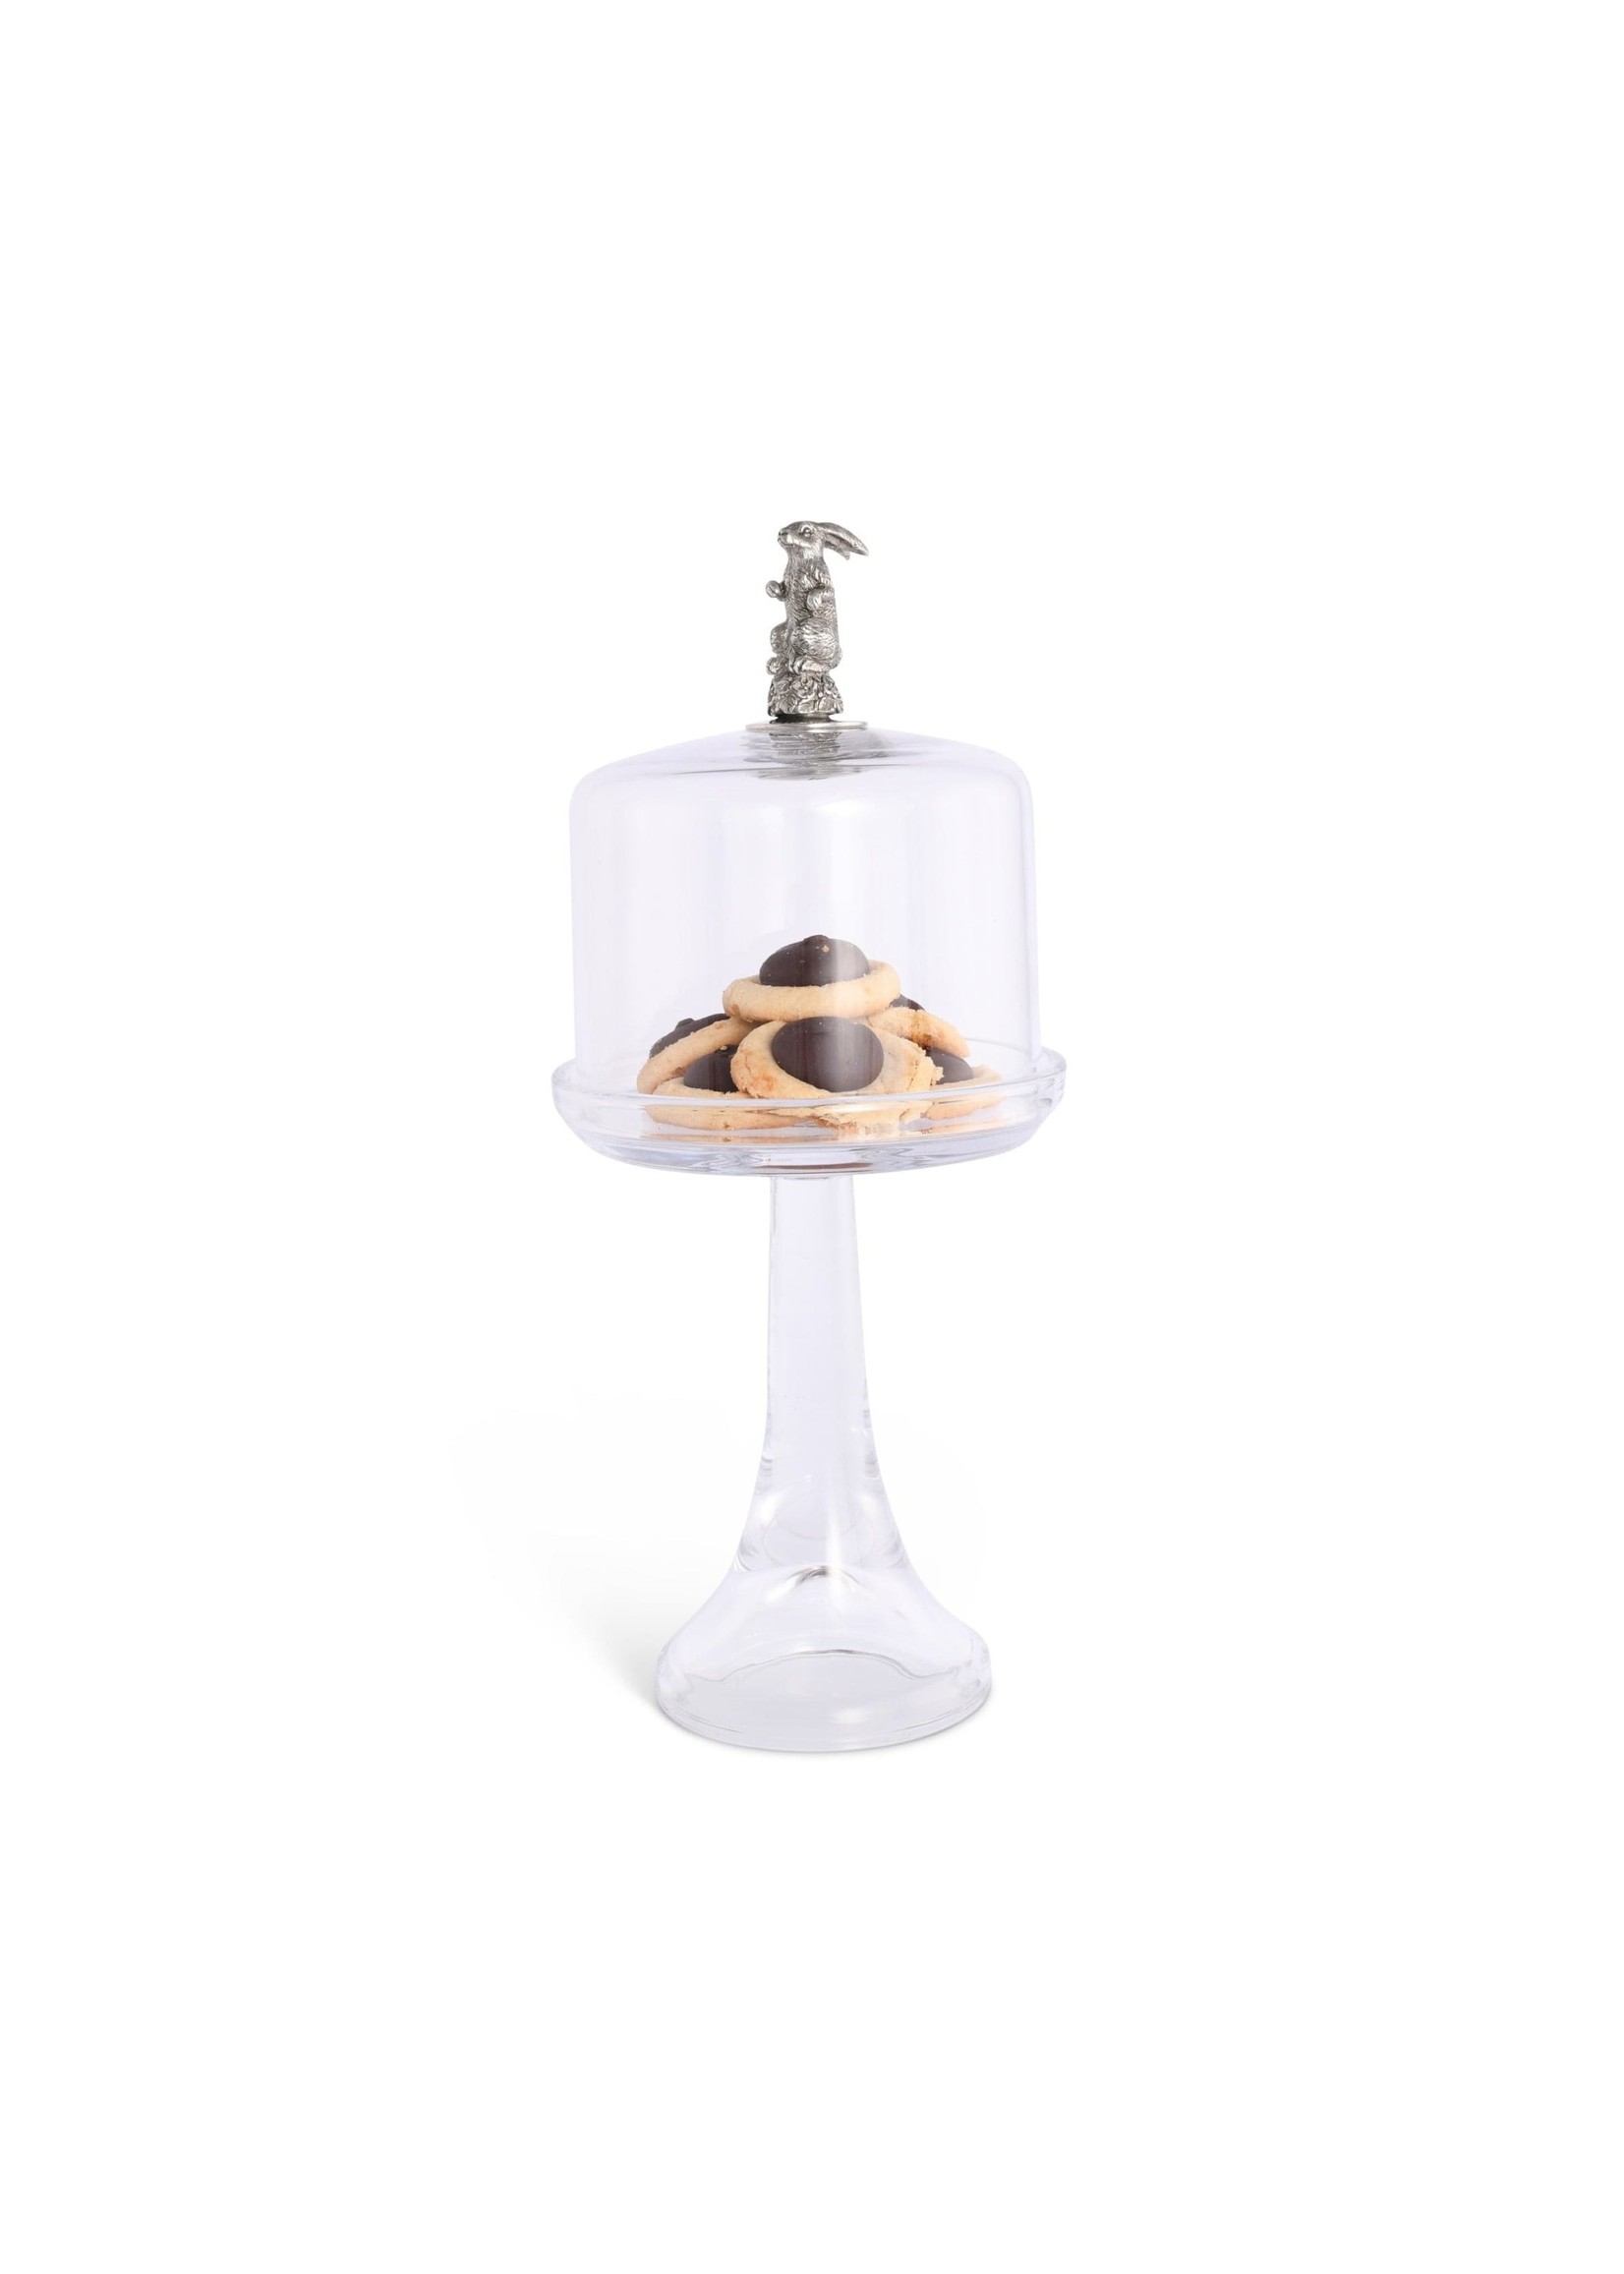 Glass Covered Cake/Dessert Stand - Bunny - Tall